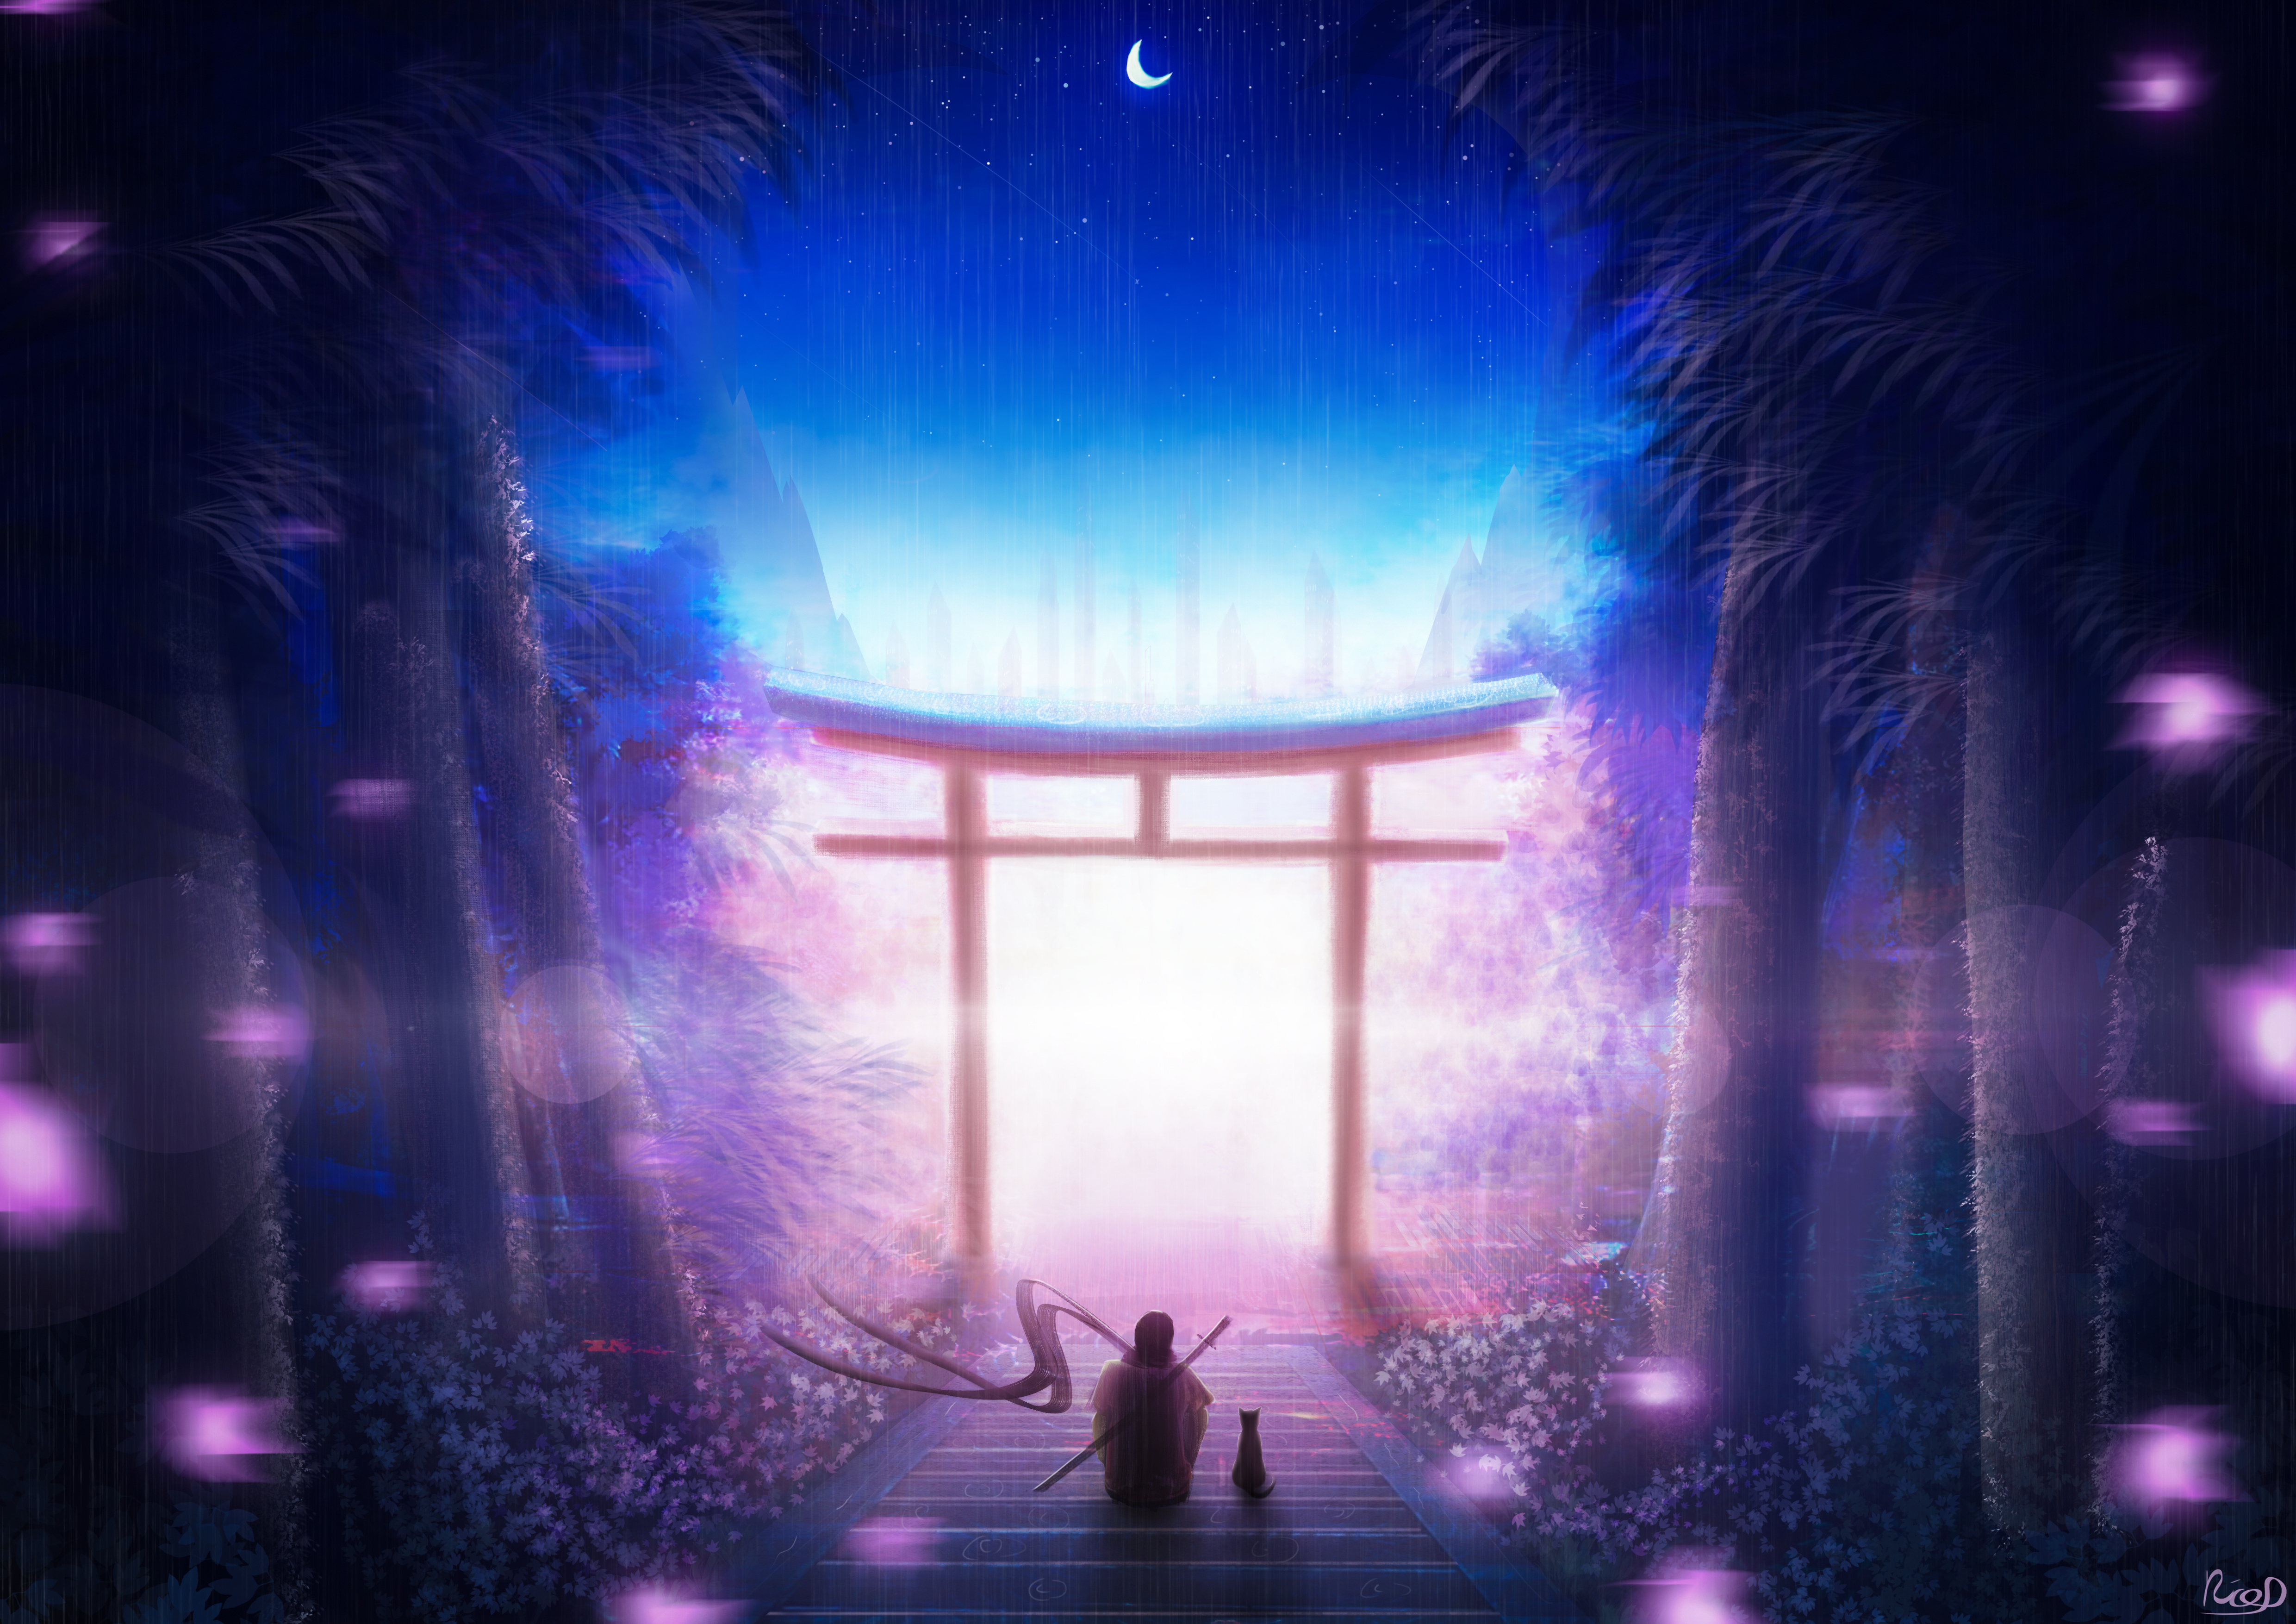 warrior, art, night, privacy, seclusion, torii